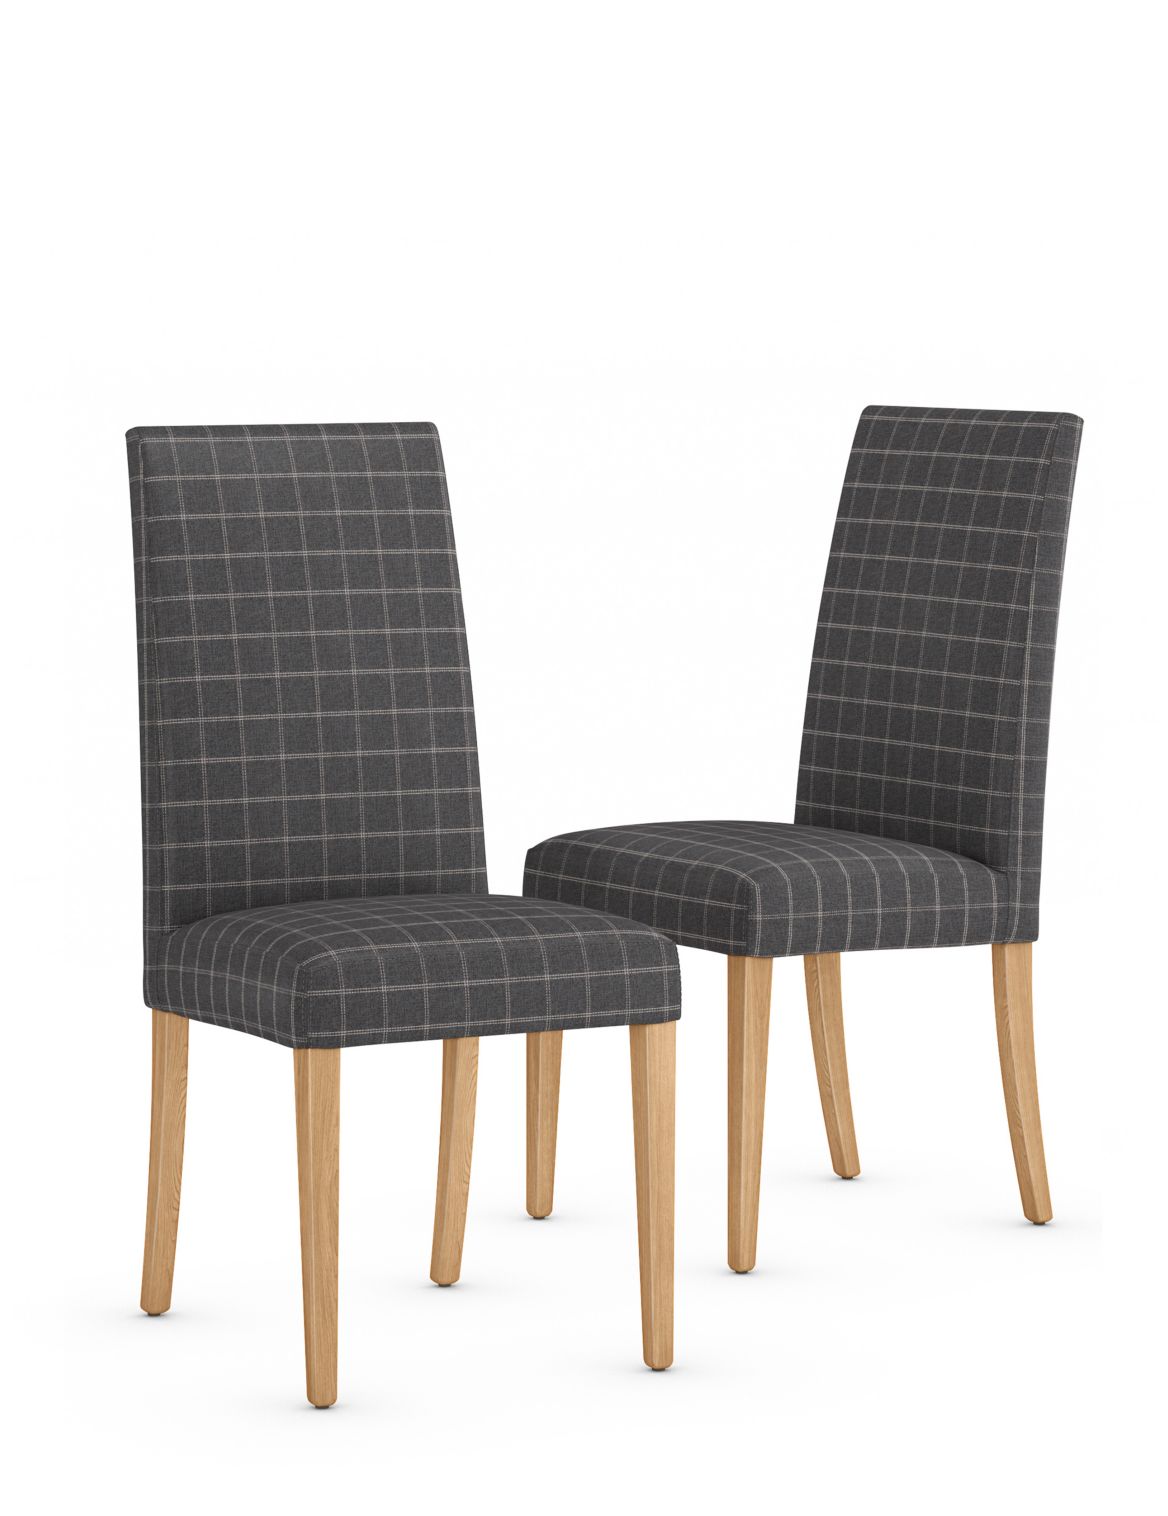 Set of 2 Alton Checked Fabric Dining Chairs grey